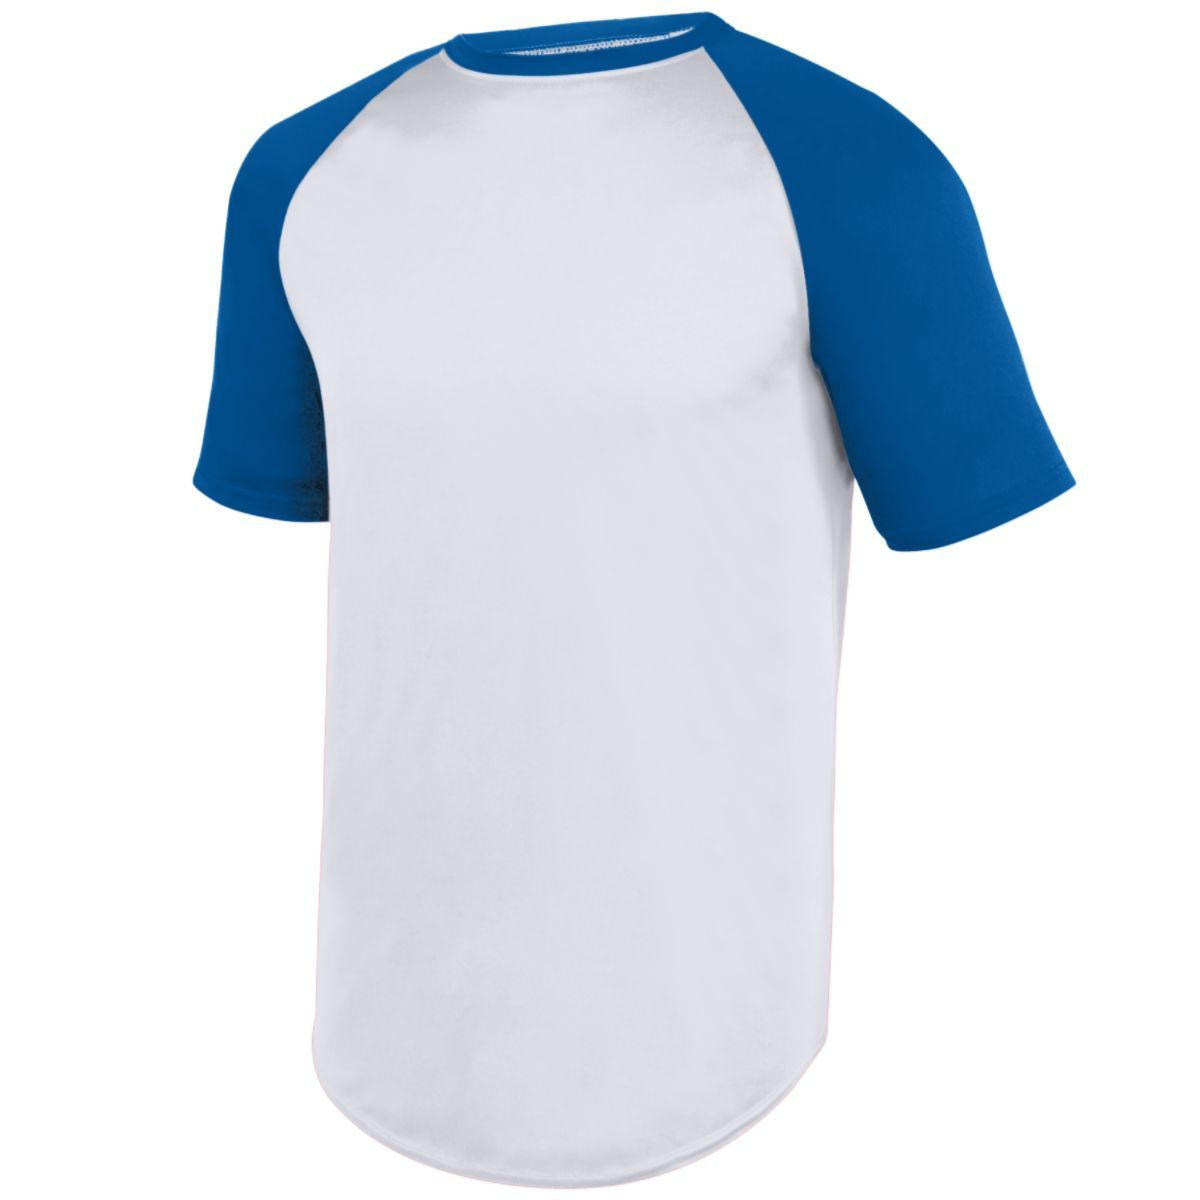 Augusta Sportswear Youth Wicking Short Sleeve Baseball Jersey in White/Royal  -Part of the Youth, Youth-Jersey, Augusta-Products, Baseball, Shirts, All-Sports, All-Sports-1 product lines at KanaleyCreations.com